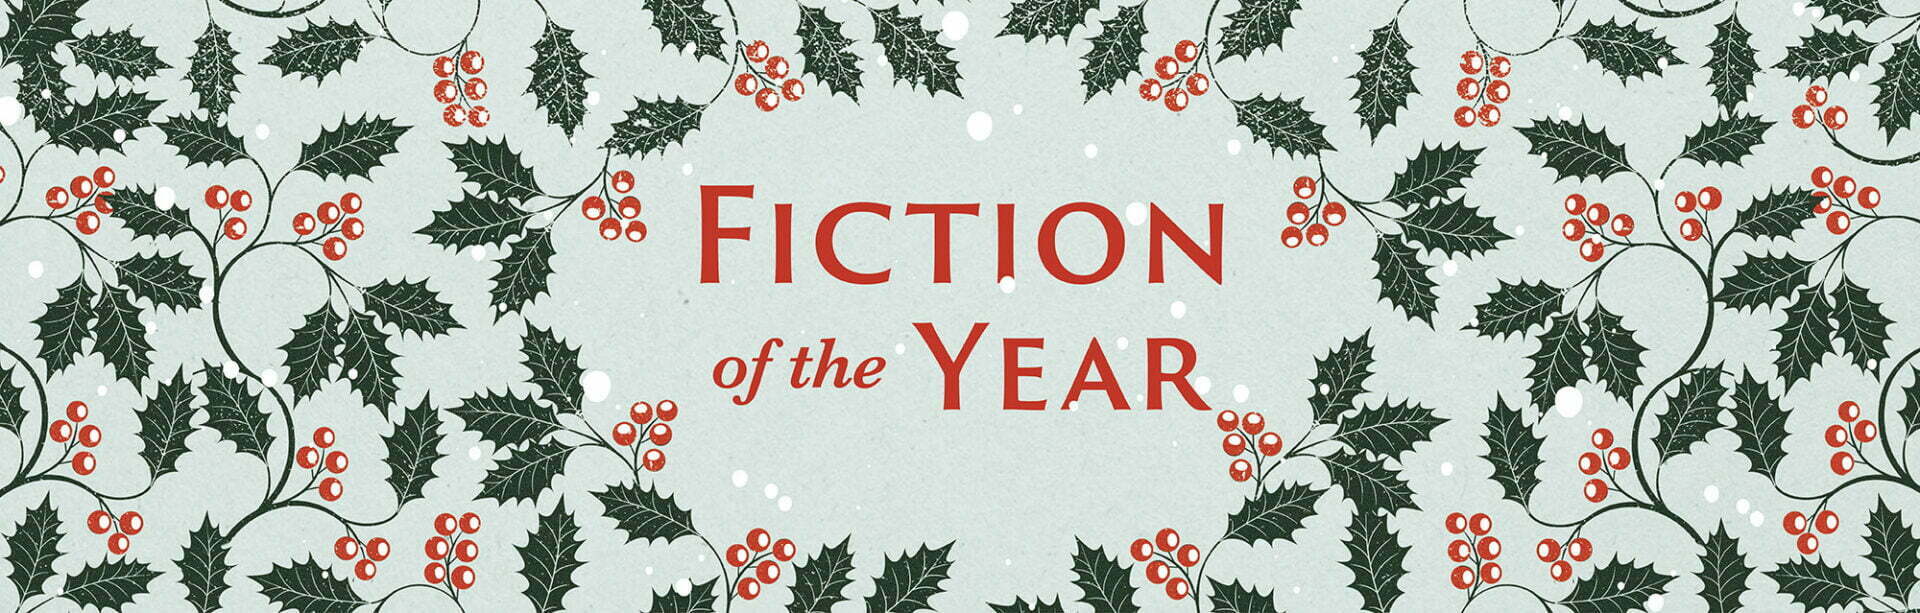 https://faber.wp.dev.diffusion.digital/wp-content/uploads/2021/11/Faber-Christmas-Gift-Guide-Fiction-of-the-Year-1920x613.jpg